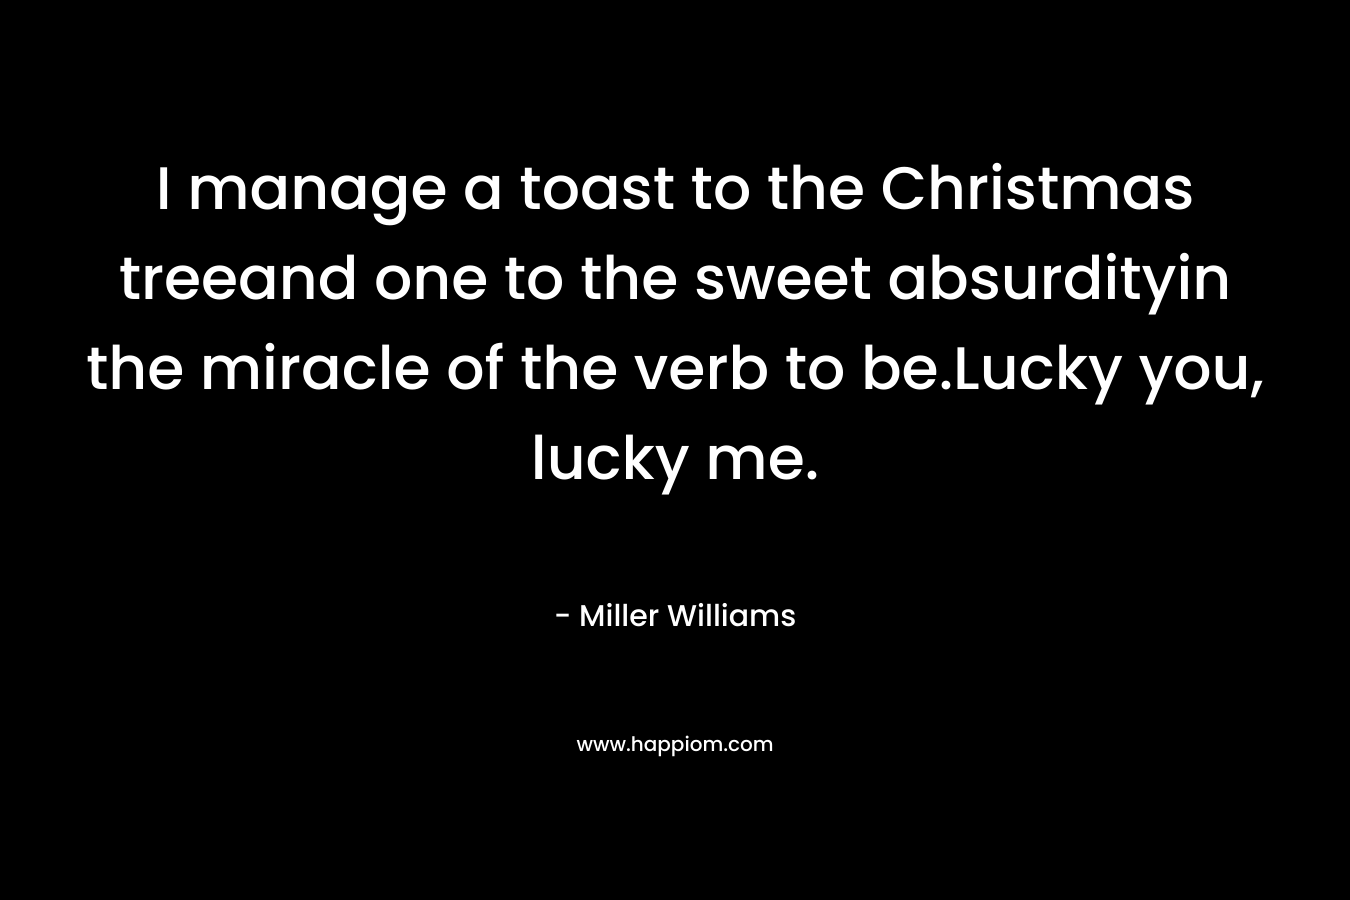 I manage a toast to the Christmas treeand one to the sweet absurdityin the miracle of the verb to be.Lucky you, lucky me. – Miller Williams